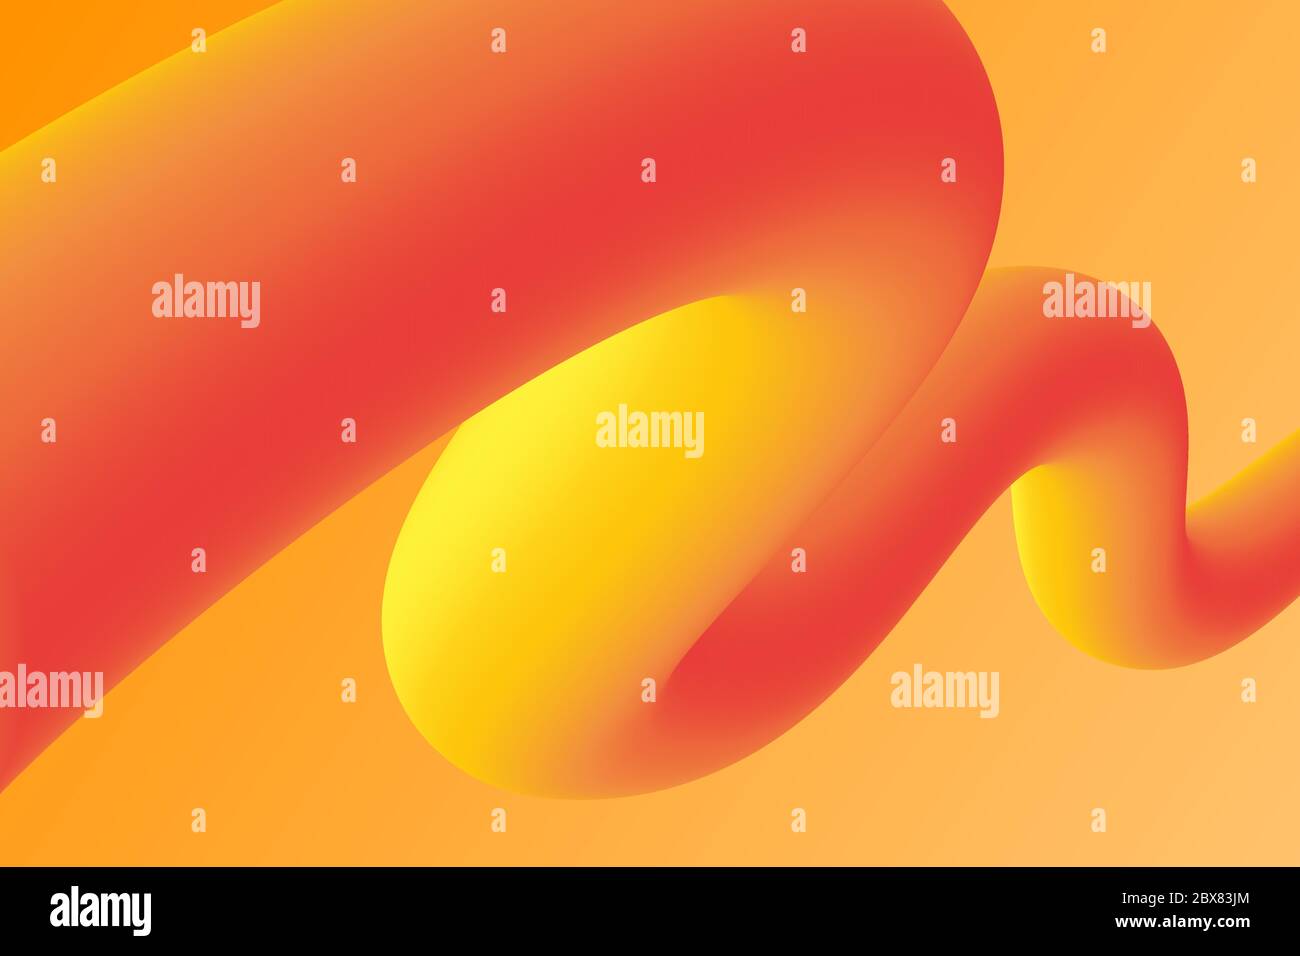 Fluid abstract curve gradient design on orange background. Liquid shape for cover, poster, banner template. Stock Vector